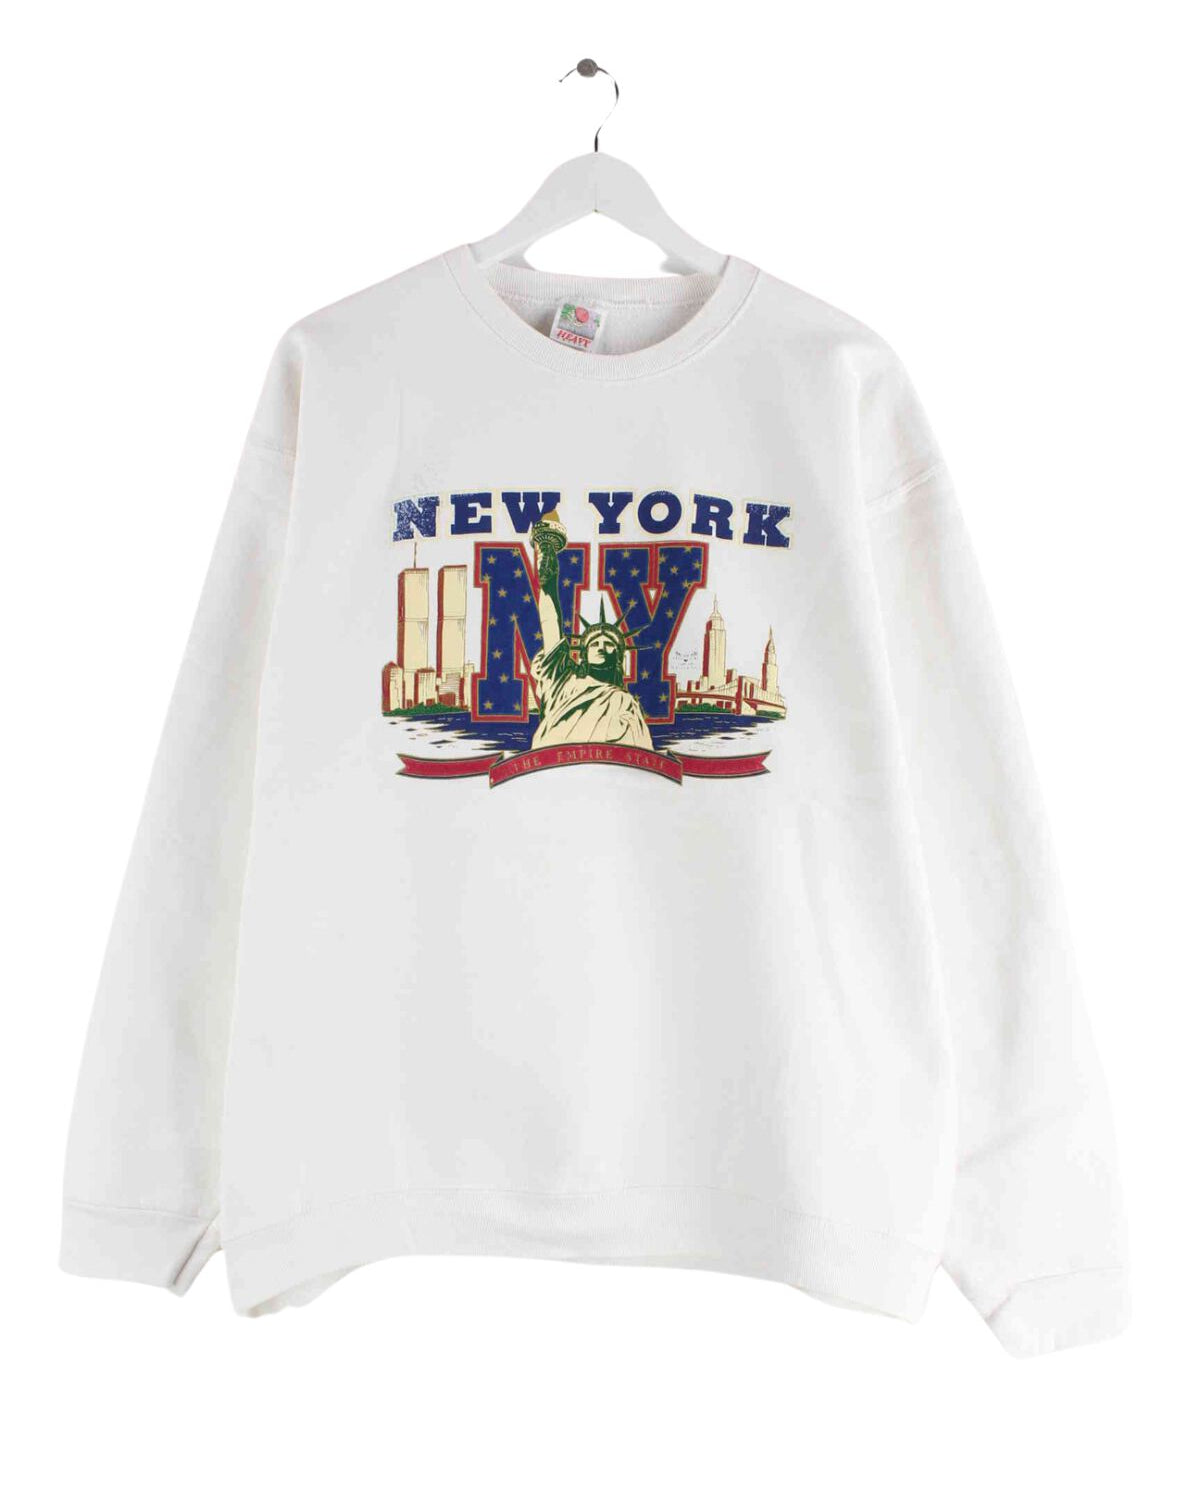 Fruit of the Loom 90s New York Print Heavy Cotton Sweater Weiß L (front image)